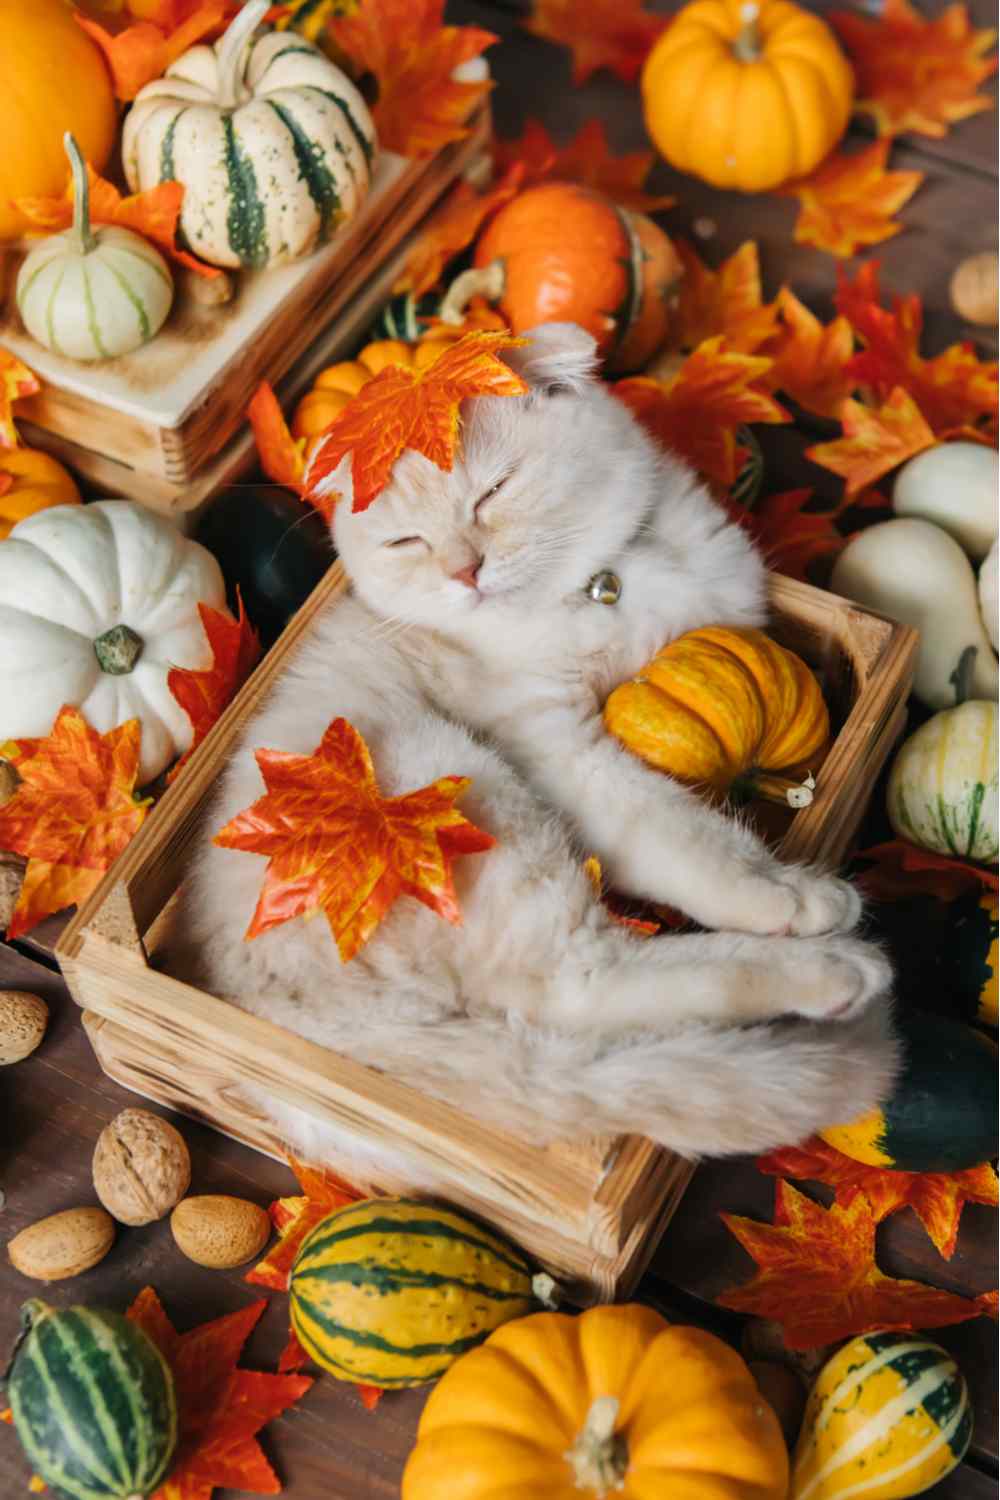 A happy white halloween cat in a wooden box surrounded by pumpkins and leaves.